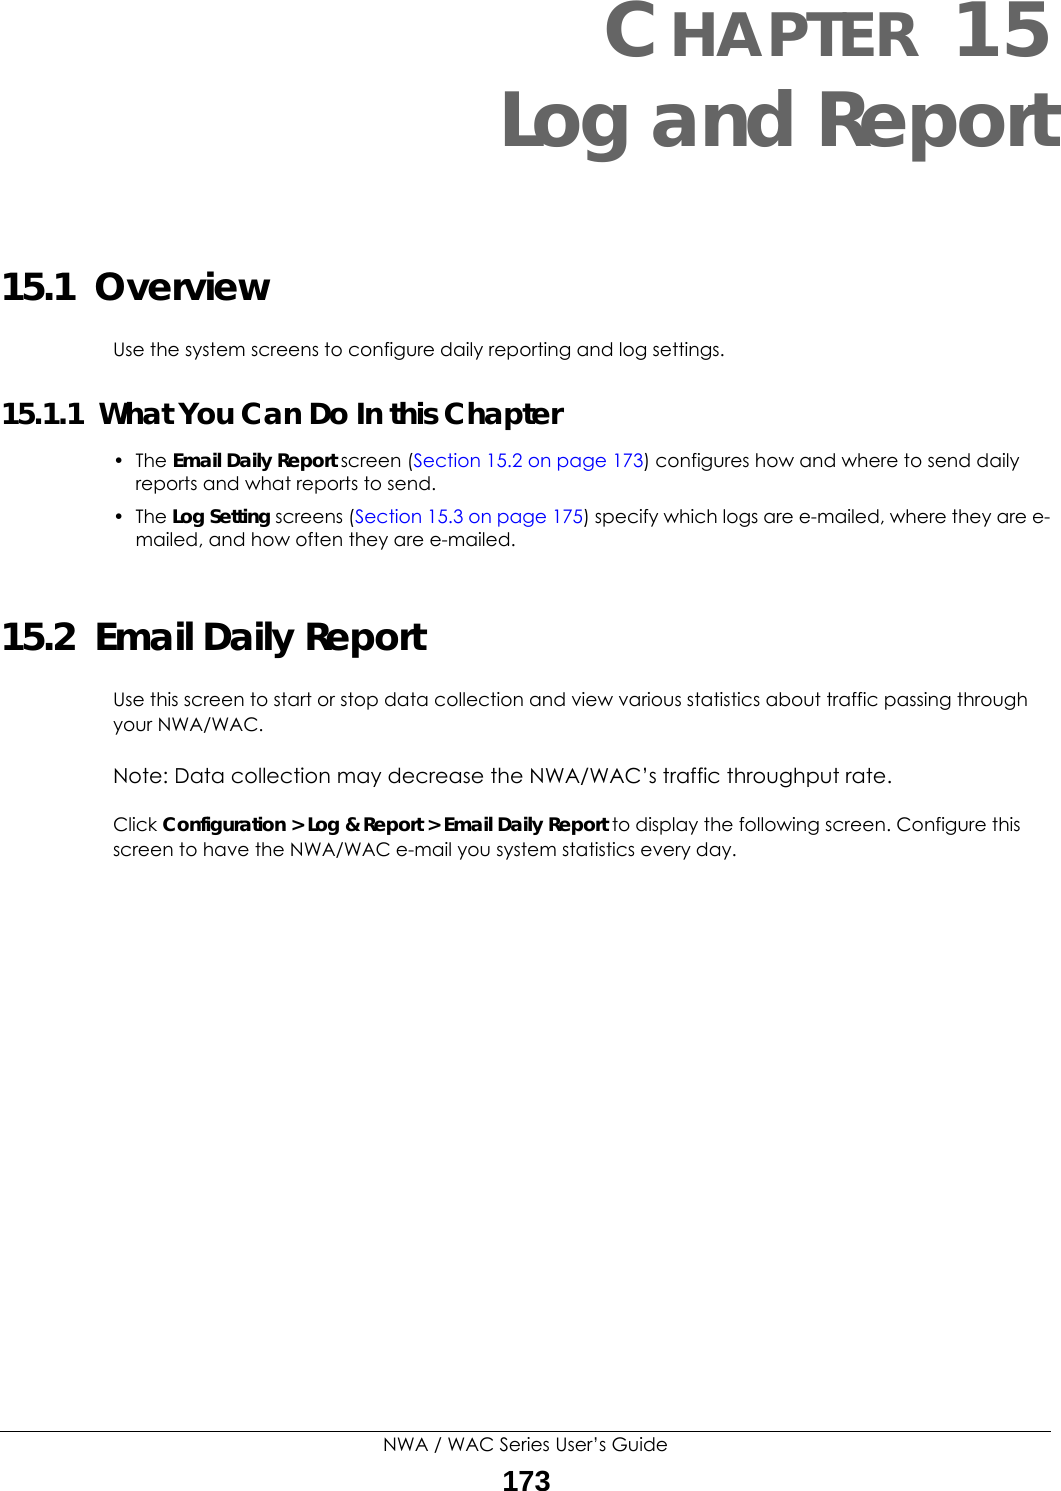 NWA / WAC Series User’s Guide173CHAPTER 15Log and Report15.1  OverviewUse the system screens to configure daily reporting and log settings. 15.1.1  What You Can Do In this Chapter• The Email Daily Report screen (Section 15.2 on page 173) configures how and where to send daily reports and what reports to send.• The Log Setting screens (Section 15.3 on page 175) specify which logs are e-mailed, where they are e-mailed, and how often they are e-mailed.15.2  Email Daily ReportUse this screen to start or stop data collection and view various statistics about traffic passing through your NWA/WAC. Note: Data collection may decrease the NWA/WAC’s traffic throughput rate.Click Configuration &gt; Log &amp; Report &gt; Email Daily Report to display the following screen. Configure this screen to have the NWA/WAC e-mail you system statistics every day. 